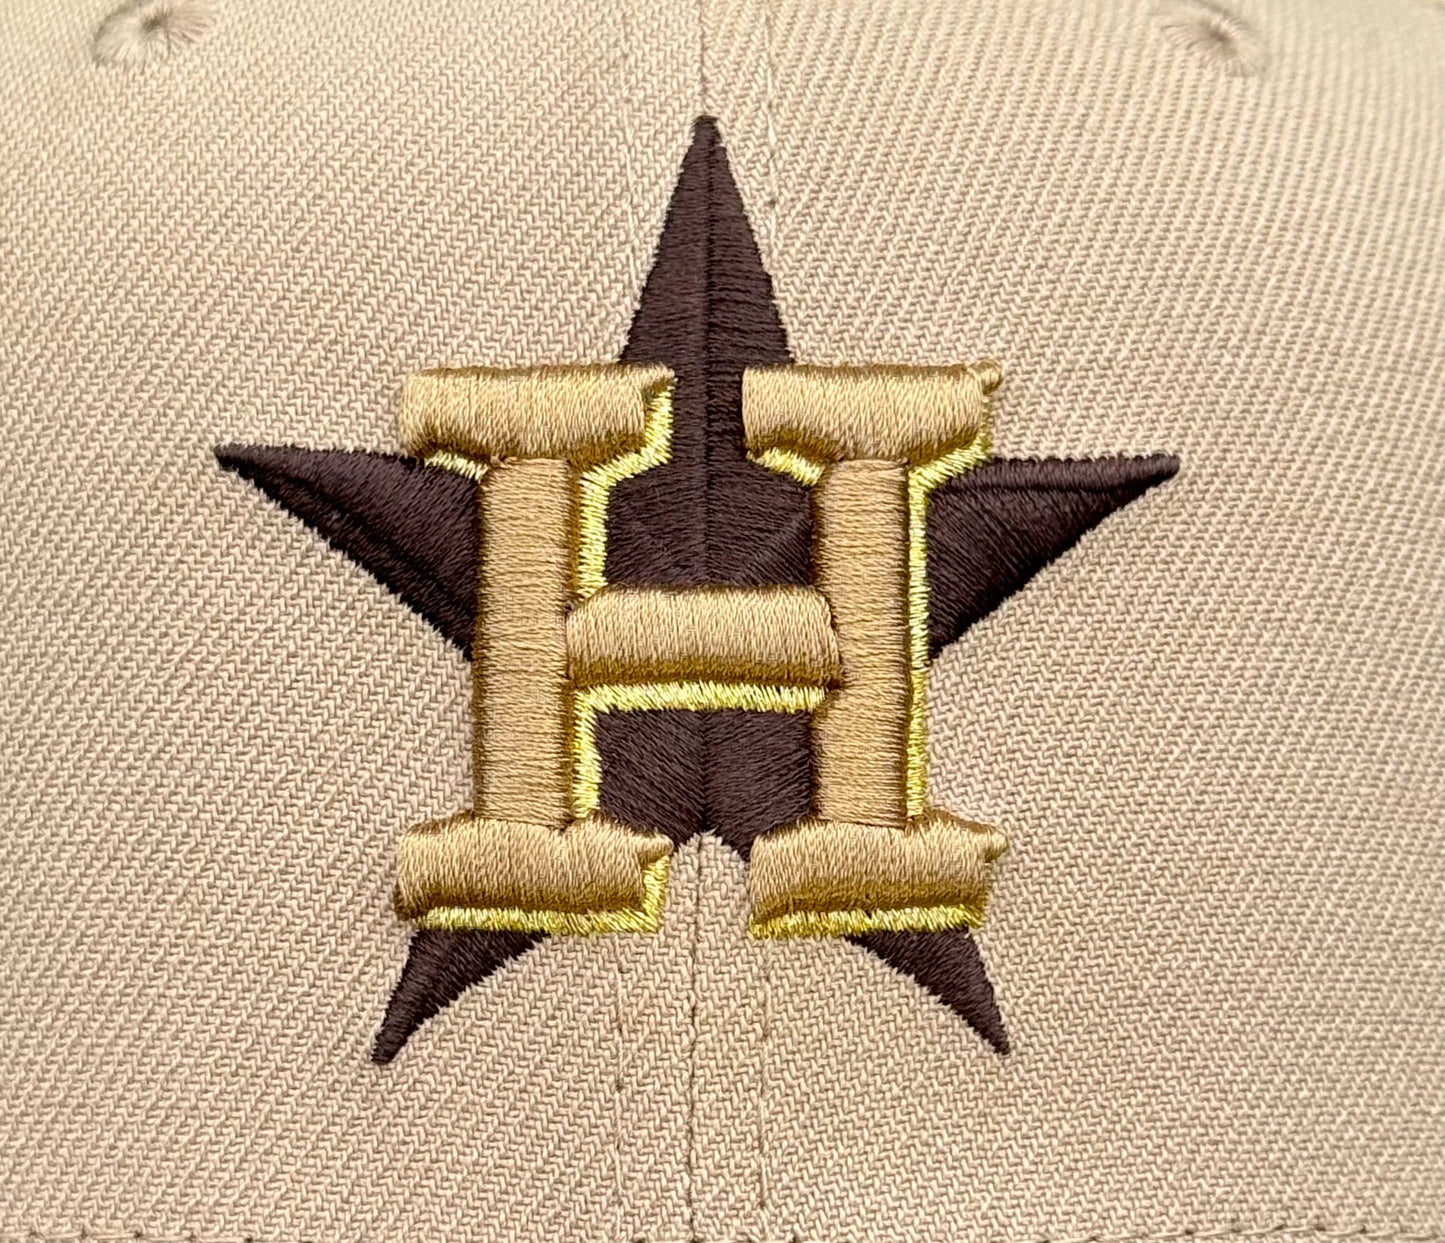 Houston Astros 2017 World Series Side Patch Fitted Hat New Era 5950 (Tan/Brown/Gold/Gray)